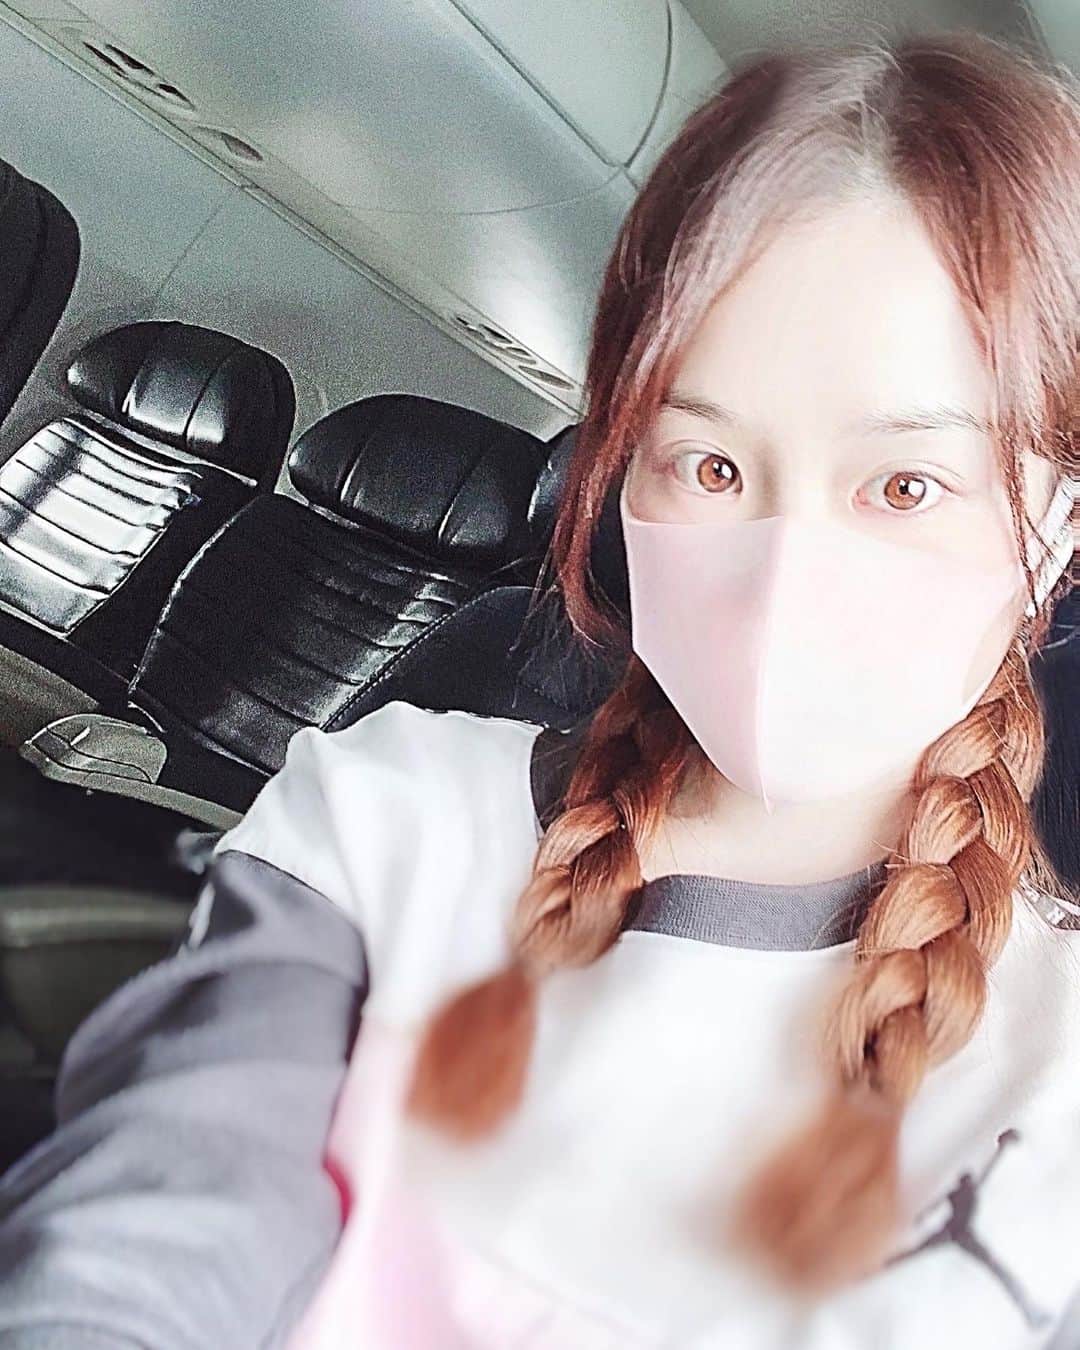 メロディー・モリタのインスタグラム：「On the plane for the first time in 5 months.✈️ Strict social distancing, masks and take-out only at the airport. * Thank you to my lovely Japanese viewer who kindly gifted me masks! I wore one that perfectly fits my face (and allows me to cover my makeup-free face😂) and put my hair in braids to prevent it from touching different things. * As you can see in the second slide, the flight was quite empty but I felt very safe since precaution/services were top-notch. I wonder how much longer it would take to experience what airports used to be like...😣 Hope you are all having a good week so far!✨  2月以来、5ヶ月ぶりのニューヨークの空港🗽✈️ * ソーシャルディスタンスのサインがあらゆる場所にあり、もちろん全員マスク。カフェなどは閉まっていて、レストランもテイクアウトのみで店内の座席はシャットアウトされていました。 * 日本の視聴者さんに頂いたピッタリしたマスクを付け、髪も色々なところに触れない様に＆手で触らない様に三つ編みに💡 * いつも満席だったフライトは、2枚目の動画の状態👀🎥 * 席に座る前には除菌シートも頂き、感染予防は空港でも機内でも完璧にされていて不安はありませんでした。 * でも私はやっぱり、以前の様な活気あるワクワク感のあるニューヨークの空港が好き。またあの雰囲気を味わえるのはいつなのでしょうか...(><)」